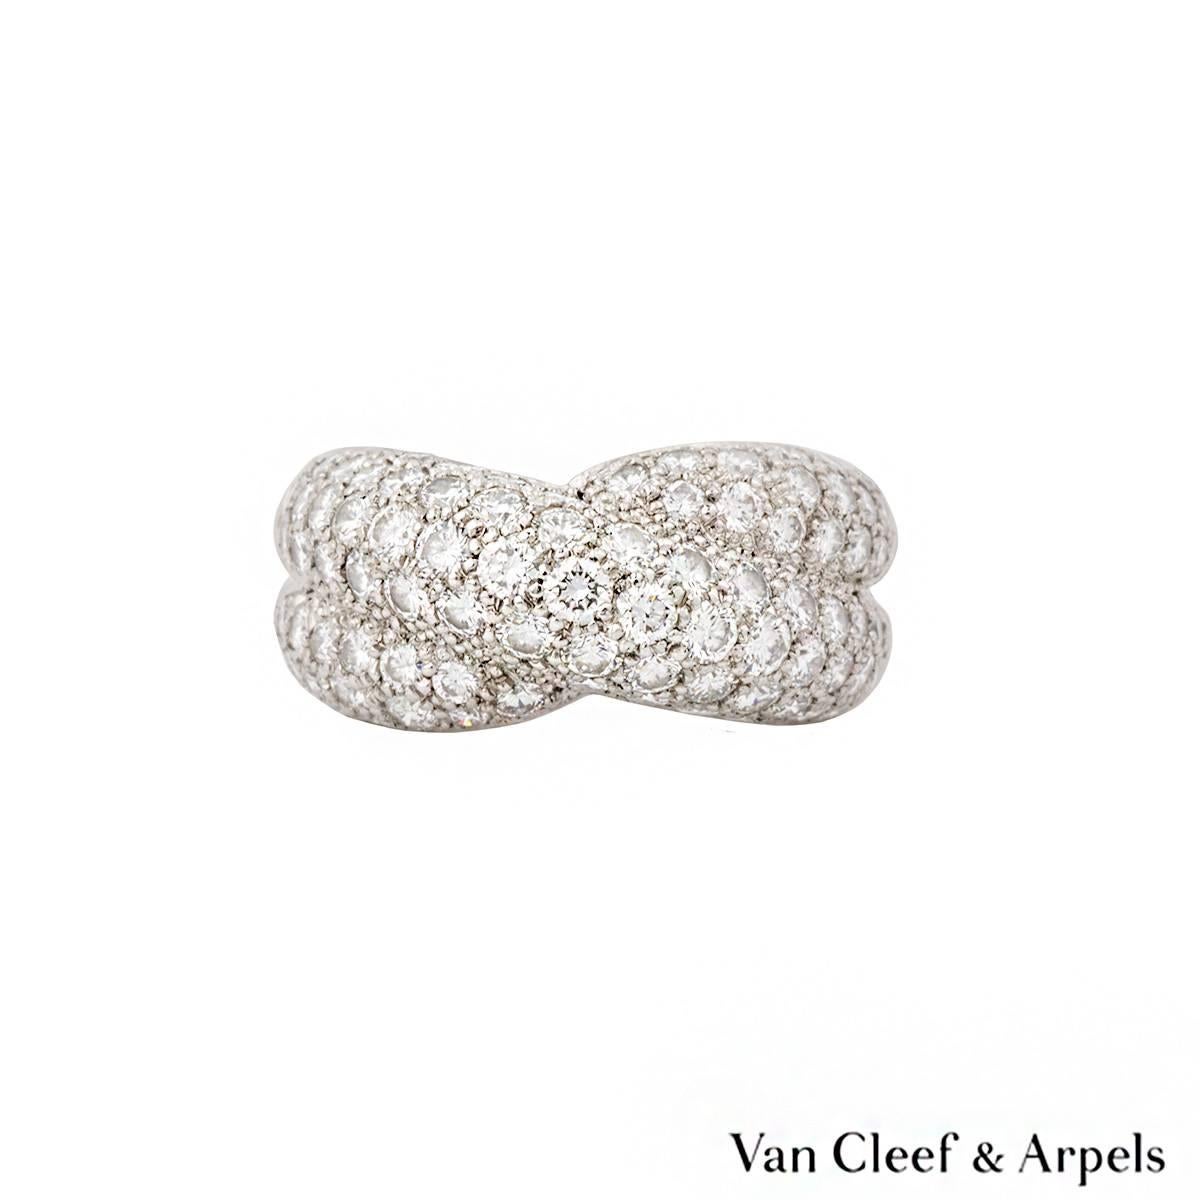 An 18k white gold diamond set dress ring by Van Cleef & Arpels. The ring is composed of two cross over intersections, each pave set with round brilliant cut diamonds totalling approximately 1.20ct, predominantly F/G colour and VS2 in clarity.